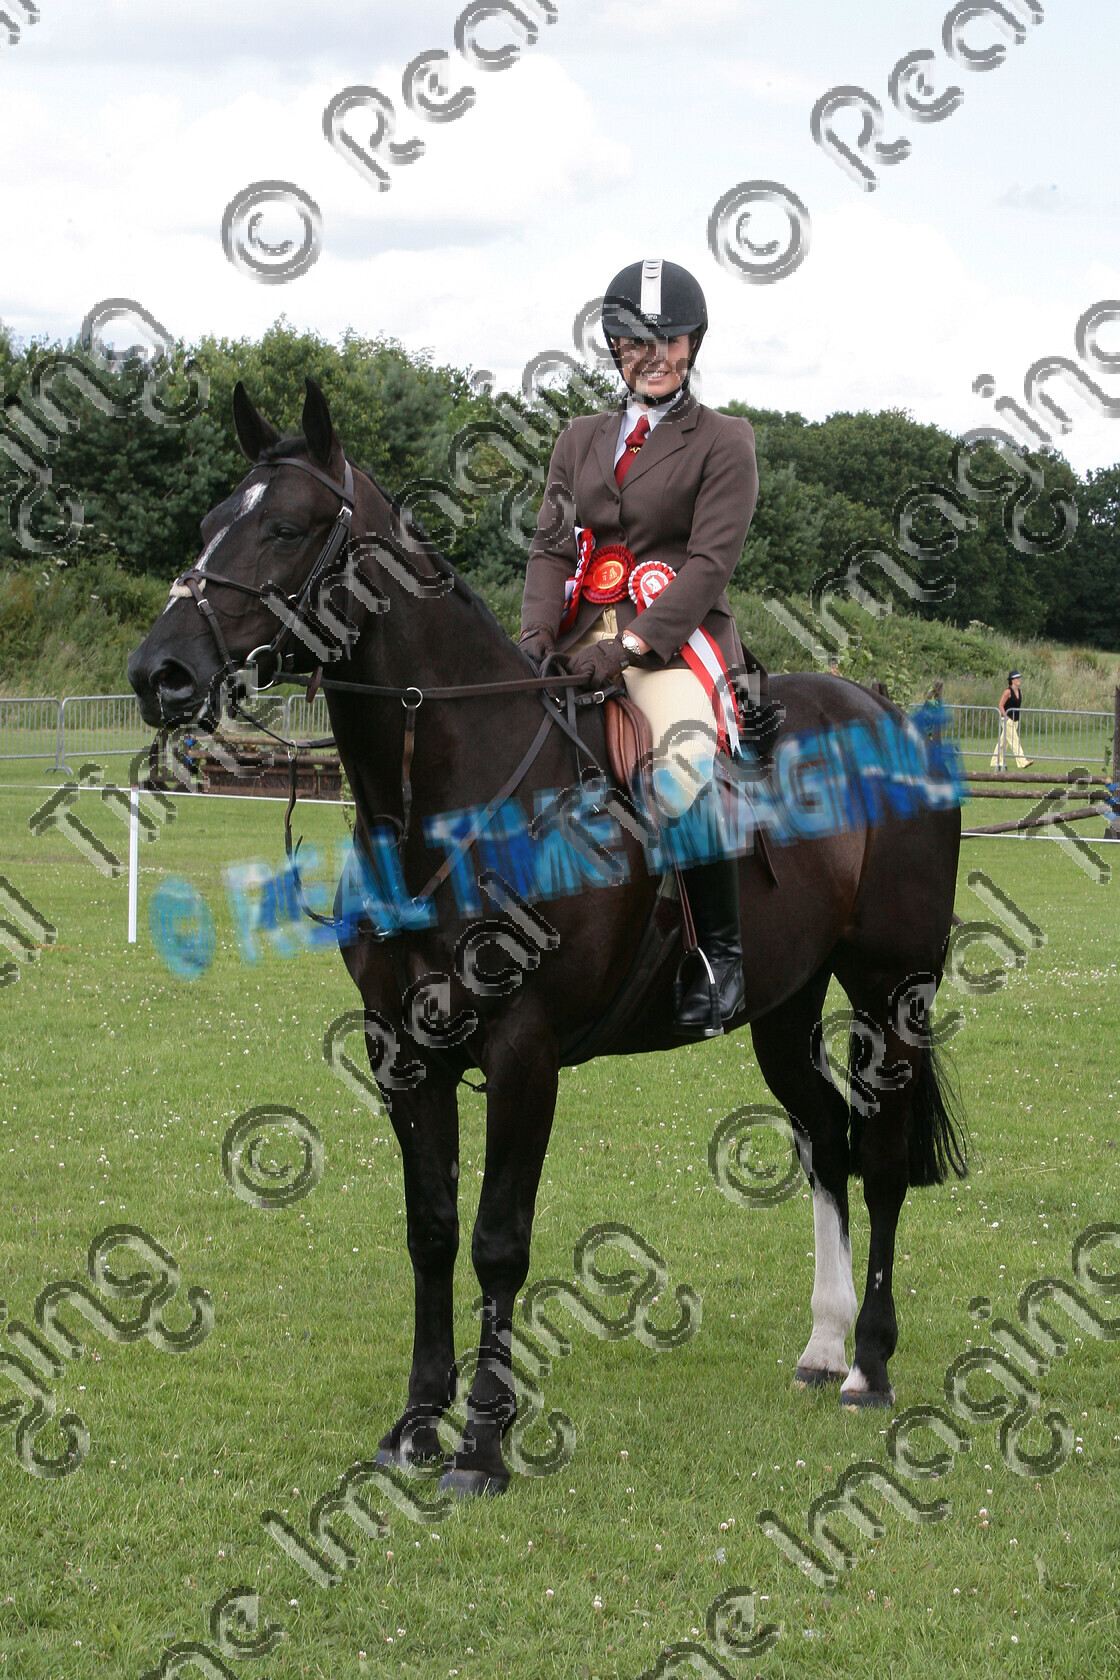 S09-31-M5-045 
 Keywords: NCPA Staffordshire Country Festival, Staffs, Walsall Airport, Aldridge, UK, Sunday, 5, July, 2009, upright portrait, HOYS, Open, Working Hunter, Championship, 1st first, Champion, winner win won, 485, CARNSDALE TOP GUN, `Rider: , Joanne Shaw, Rosette, stand, presentation